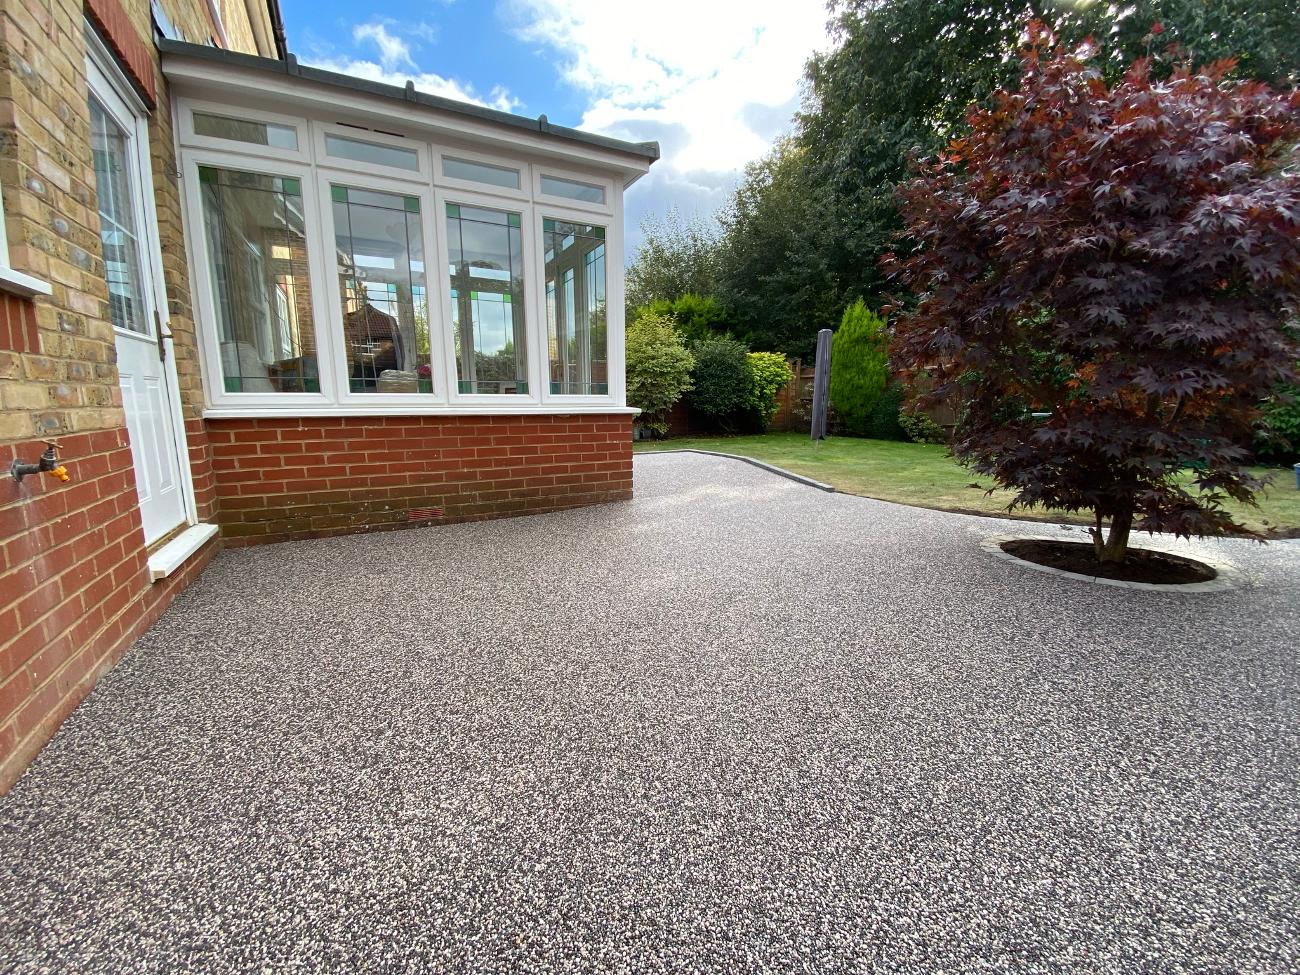 Resin Bound Surfaces | DGR Surfaces | Resin Driveways in Kent gallery image 18